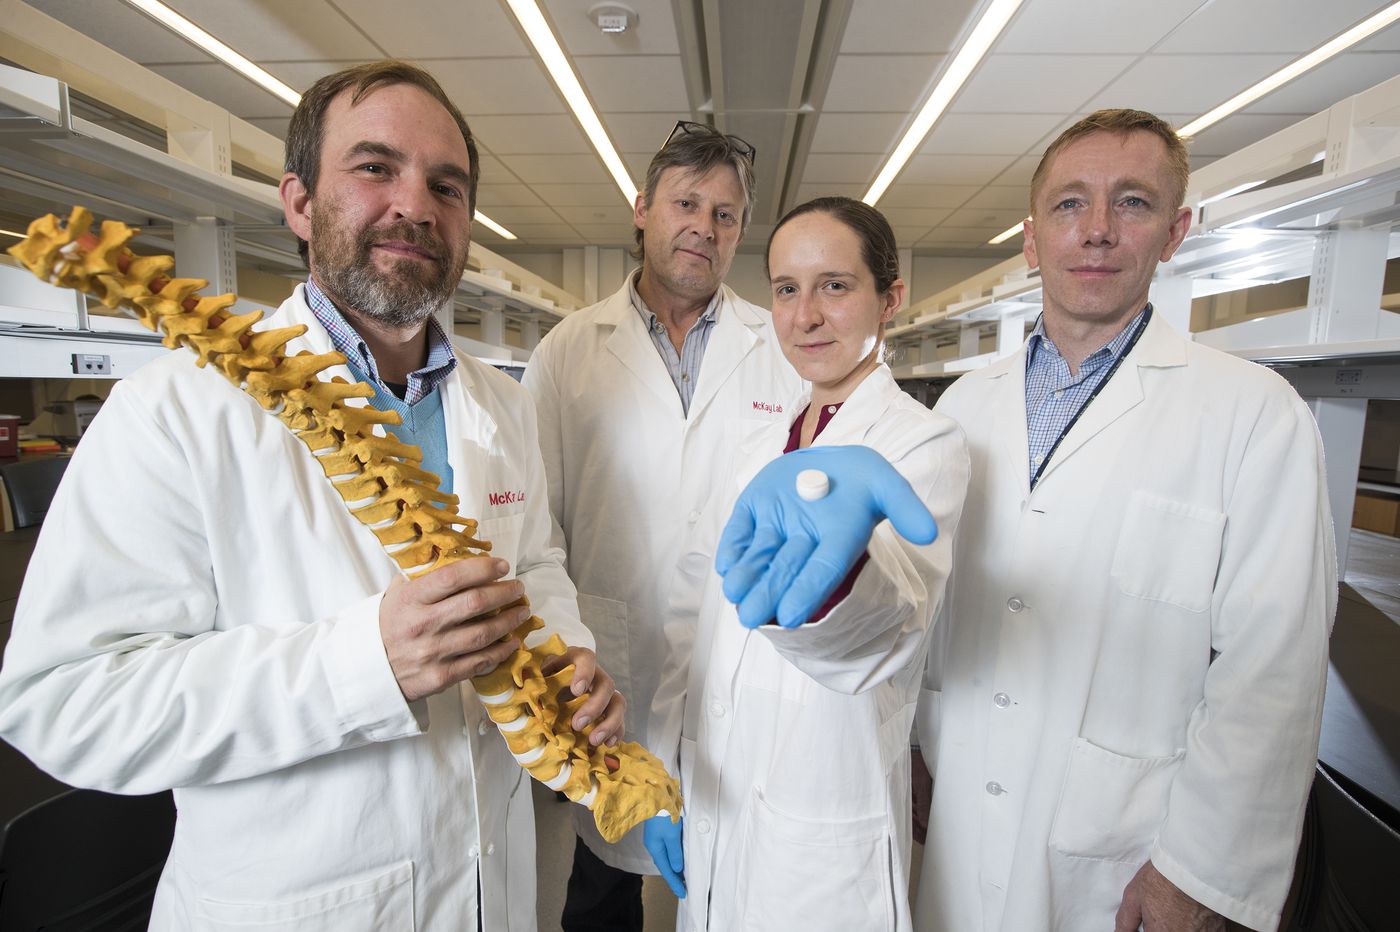 Dr. Sarah Gullbrand, Dr. Robert Mauck, Dr. Harvey Smith, and Dr. Thomas Schaer showcasing their tissue engineered intervertebral disc constructs alongside model of a human spine. 